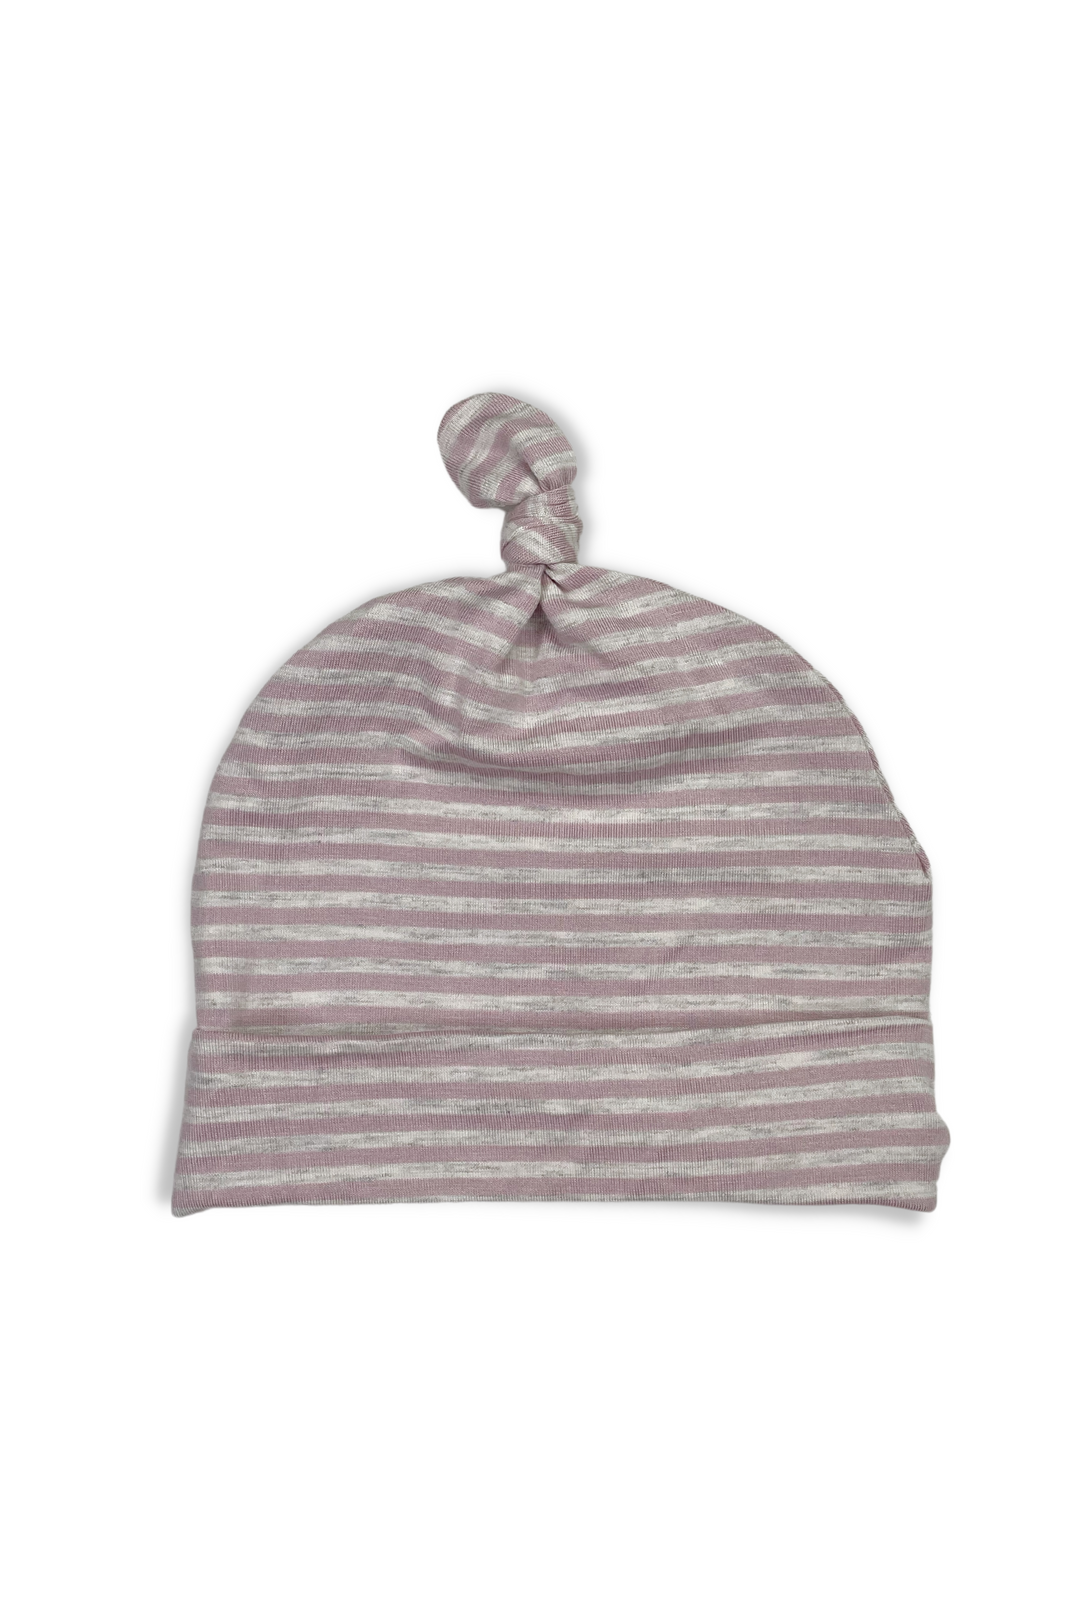 Baby Hat - Pink and Beige Striped